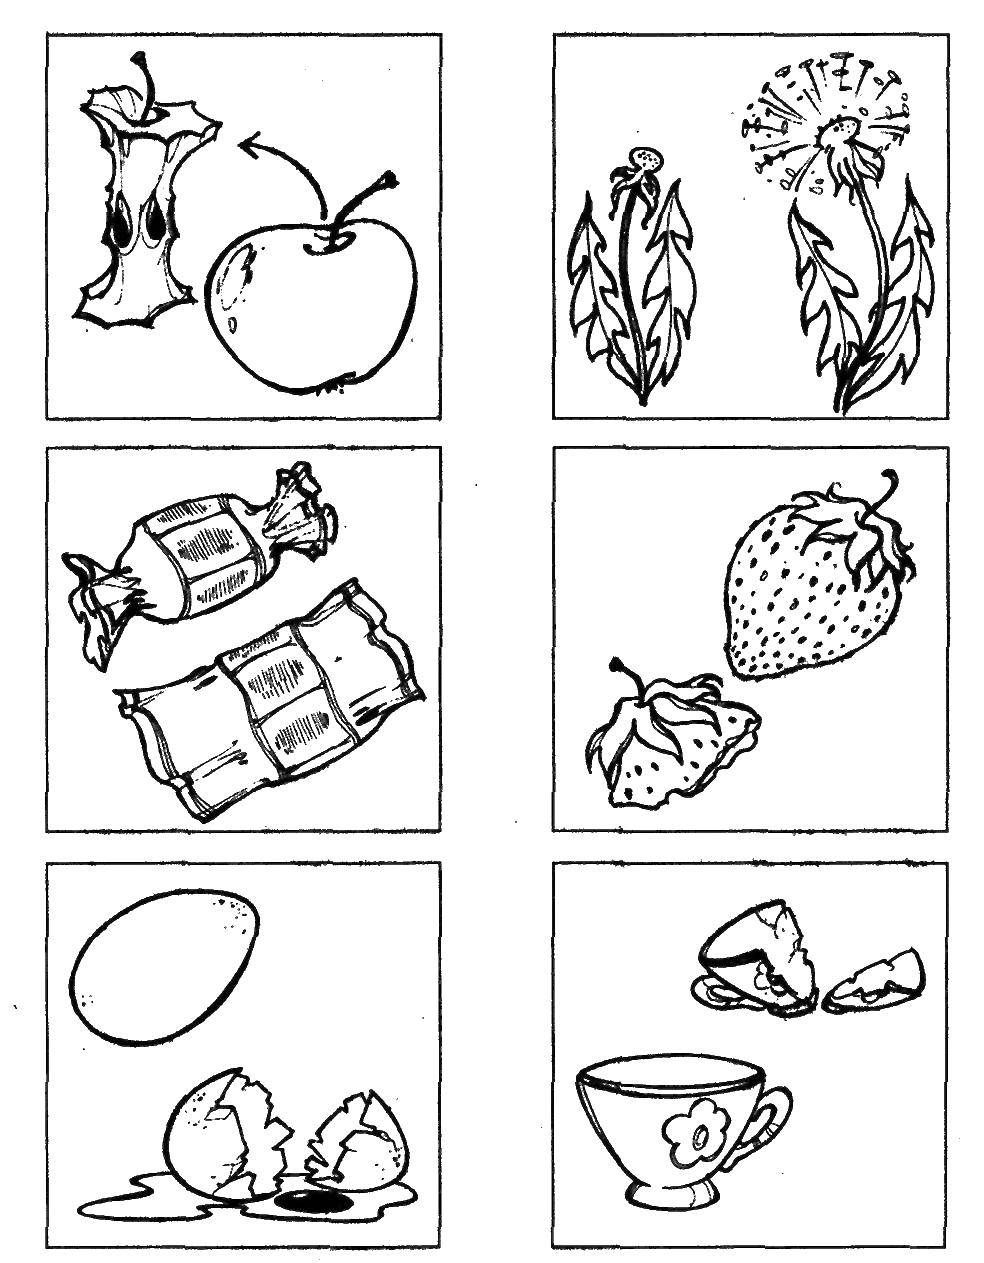 Coloring Items. Category the objects. Tags:  the items, found objects, image.